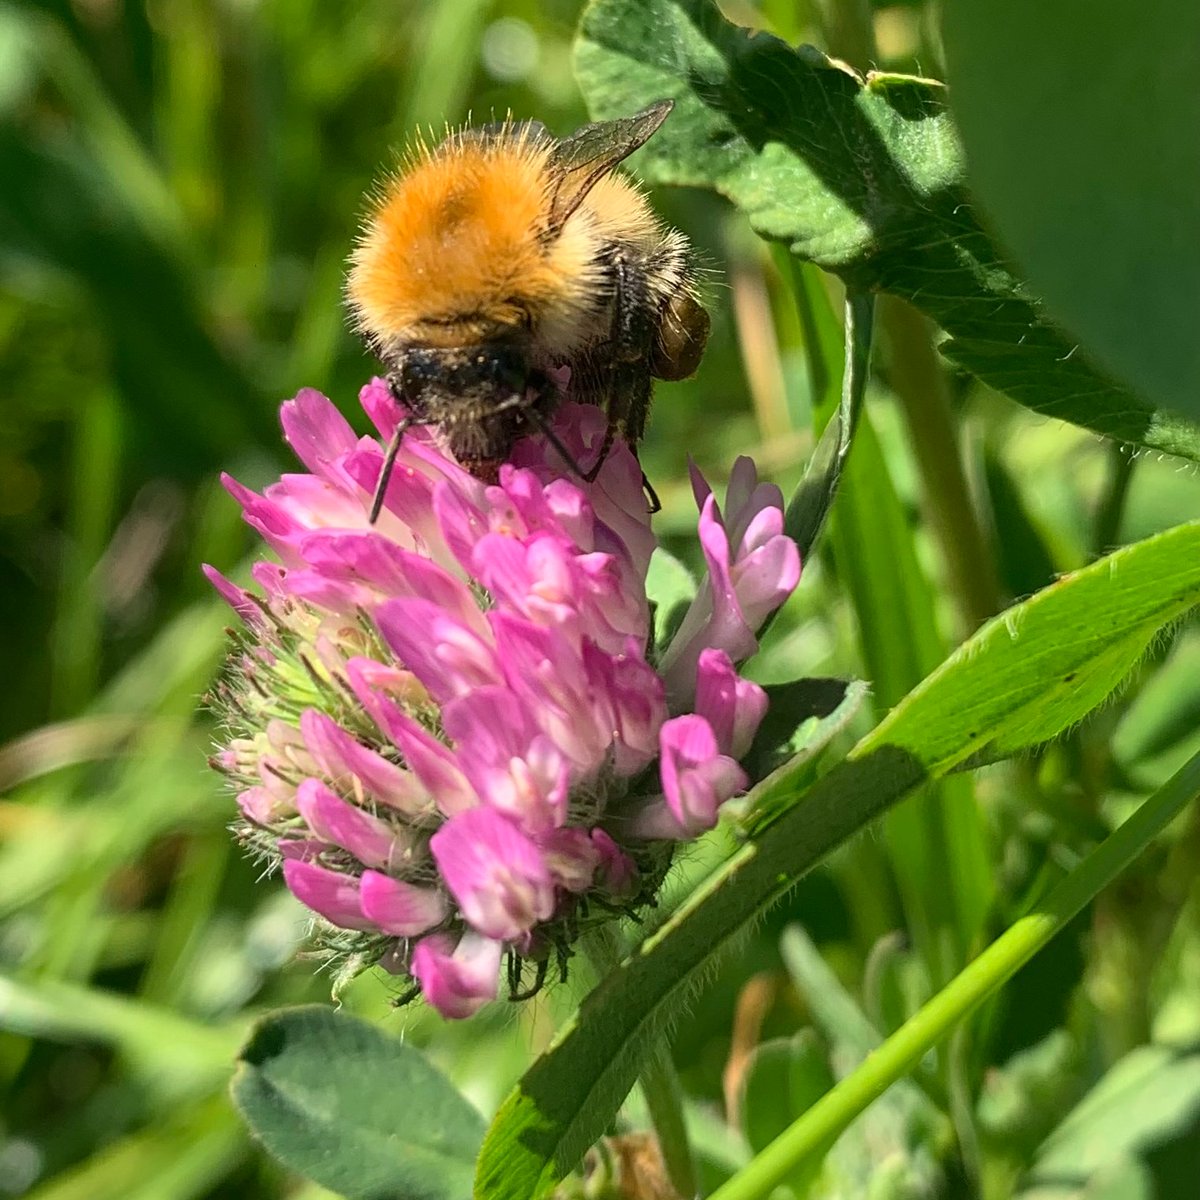 Breeding and using red clover cultivars that produce more inflorescences likely to increase the value of red clover to pollinators: research by @ciaranharris @LasiBee @SussexUni resjournals.onlinelibrary.wiley.com/doi/10.1111/af… [Photo from Ciaran Harris] #pollination #biodiversity